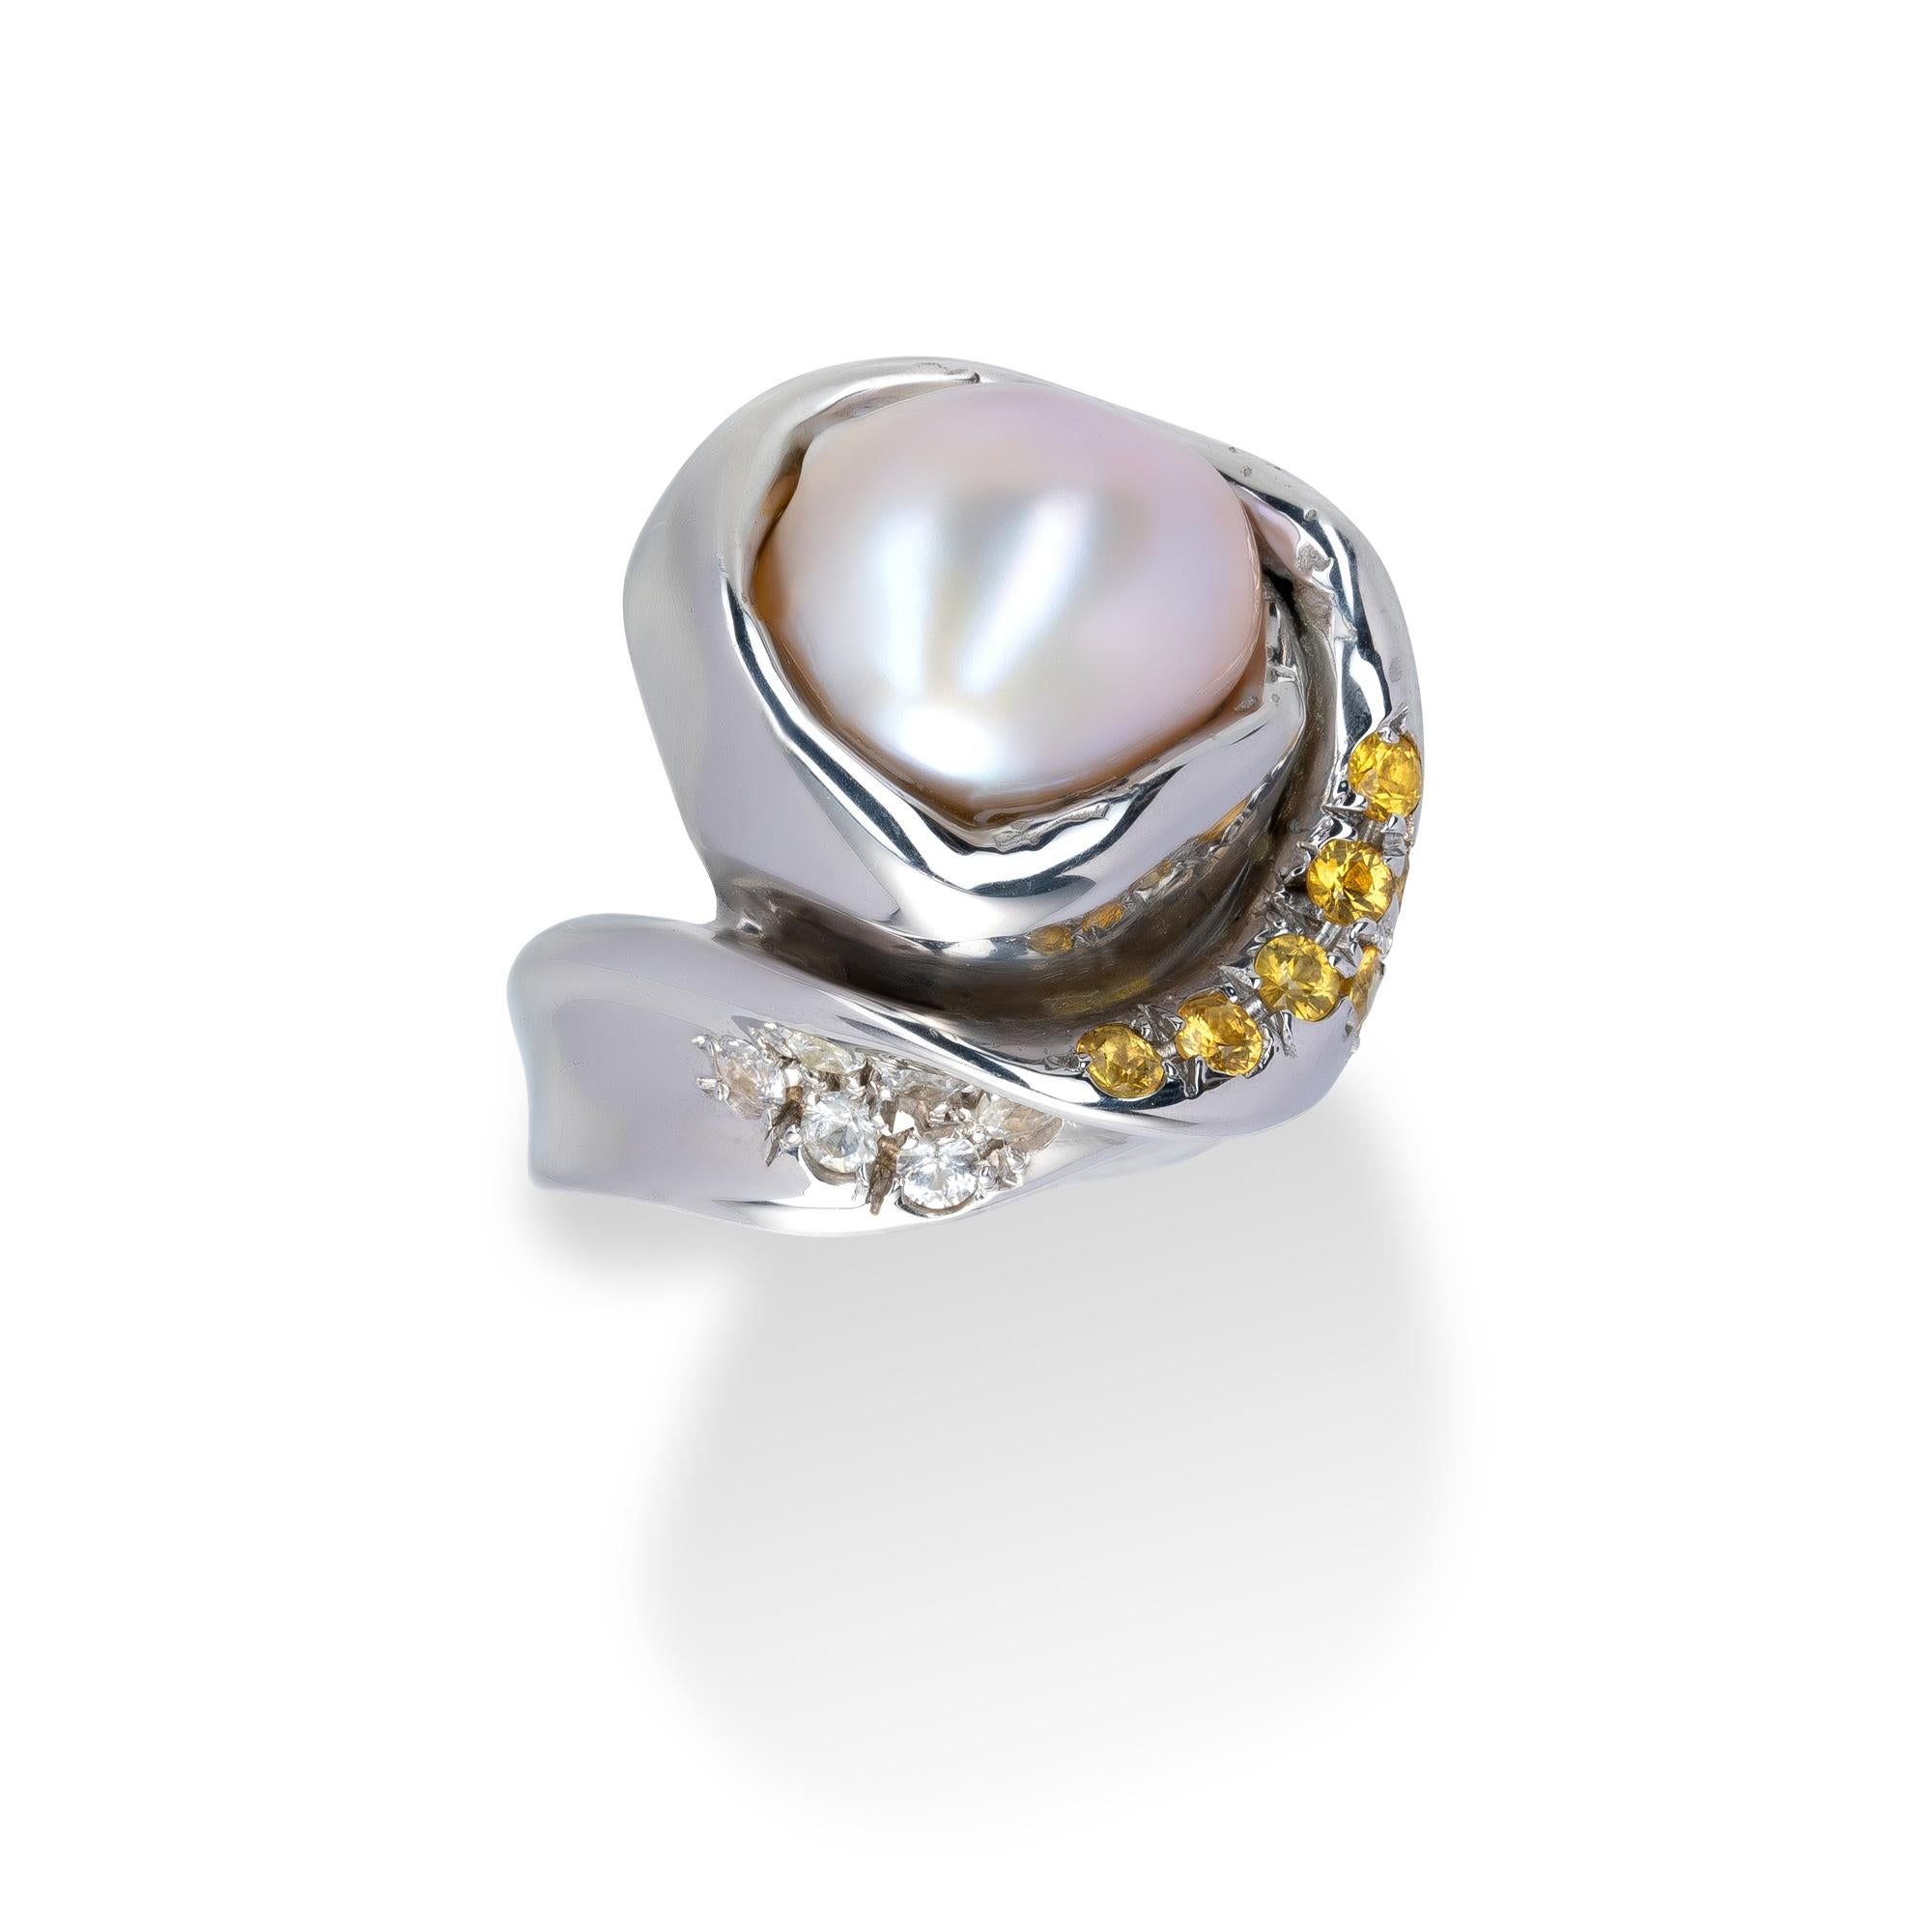 A Ring from d'Avossa Rêves d'Argent Collection in silver 925 ‰ with a 14,76 cts Central Freshwater Pearl,  enriched with a pavé of 0,61 cts Yellow Sapphires and 0,41 cts White Saphhire. 

Ref. Number AAGP106